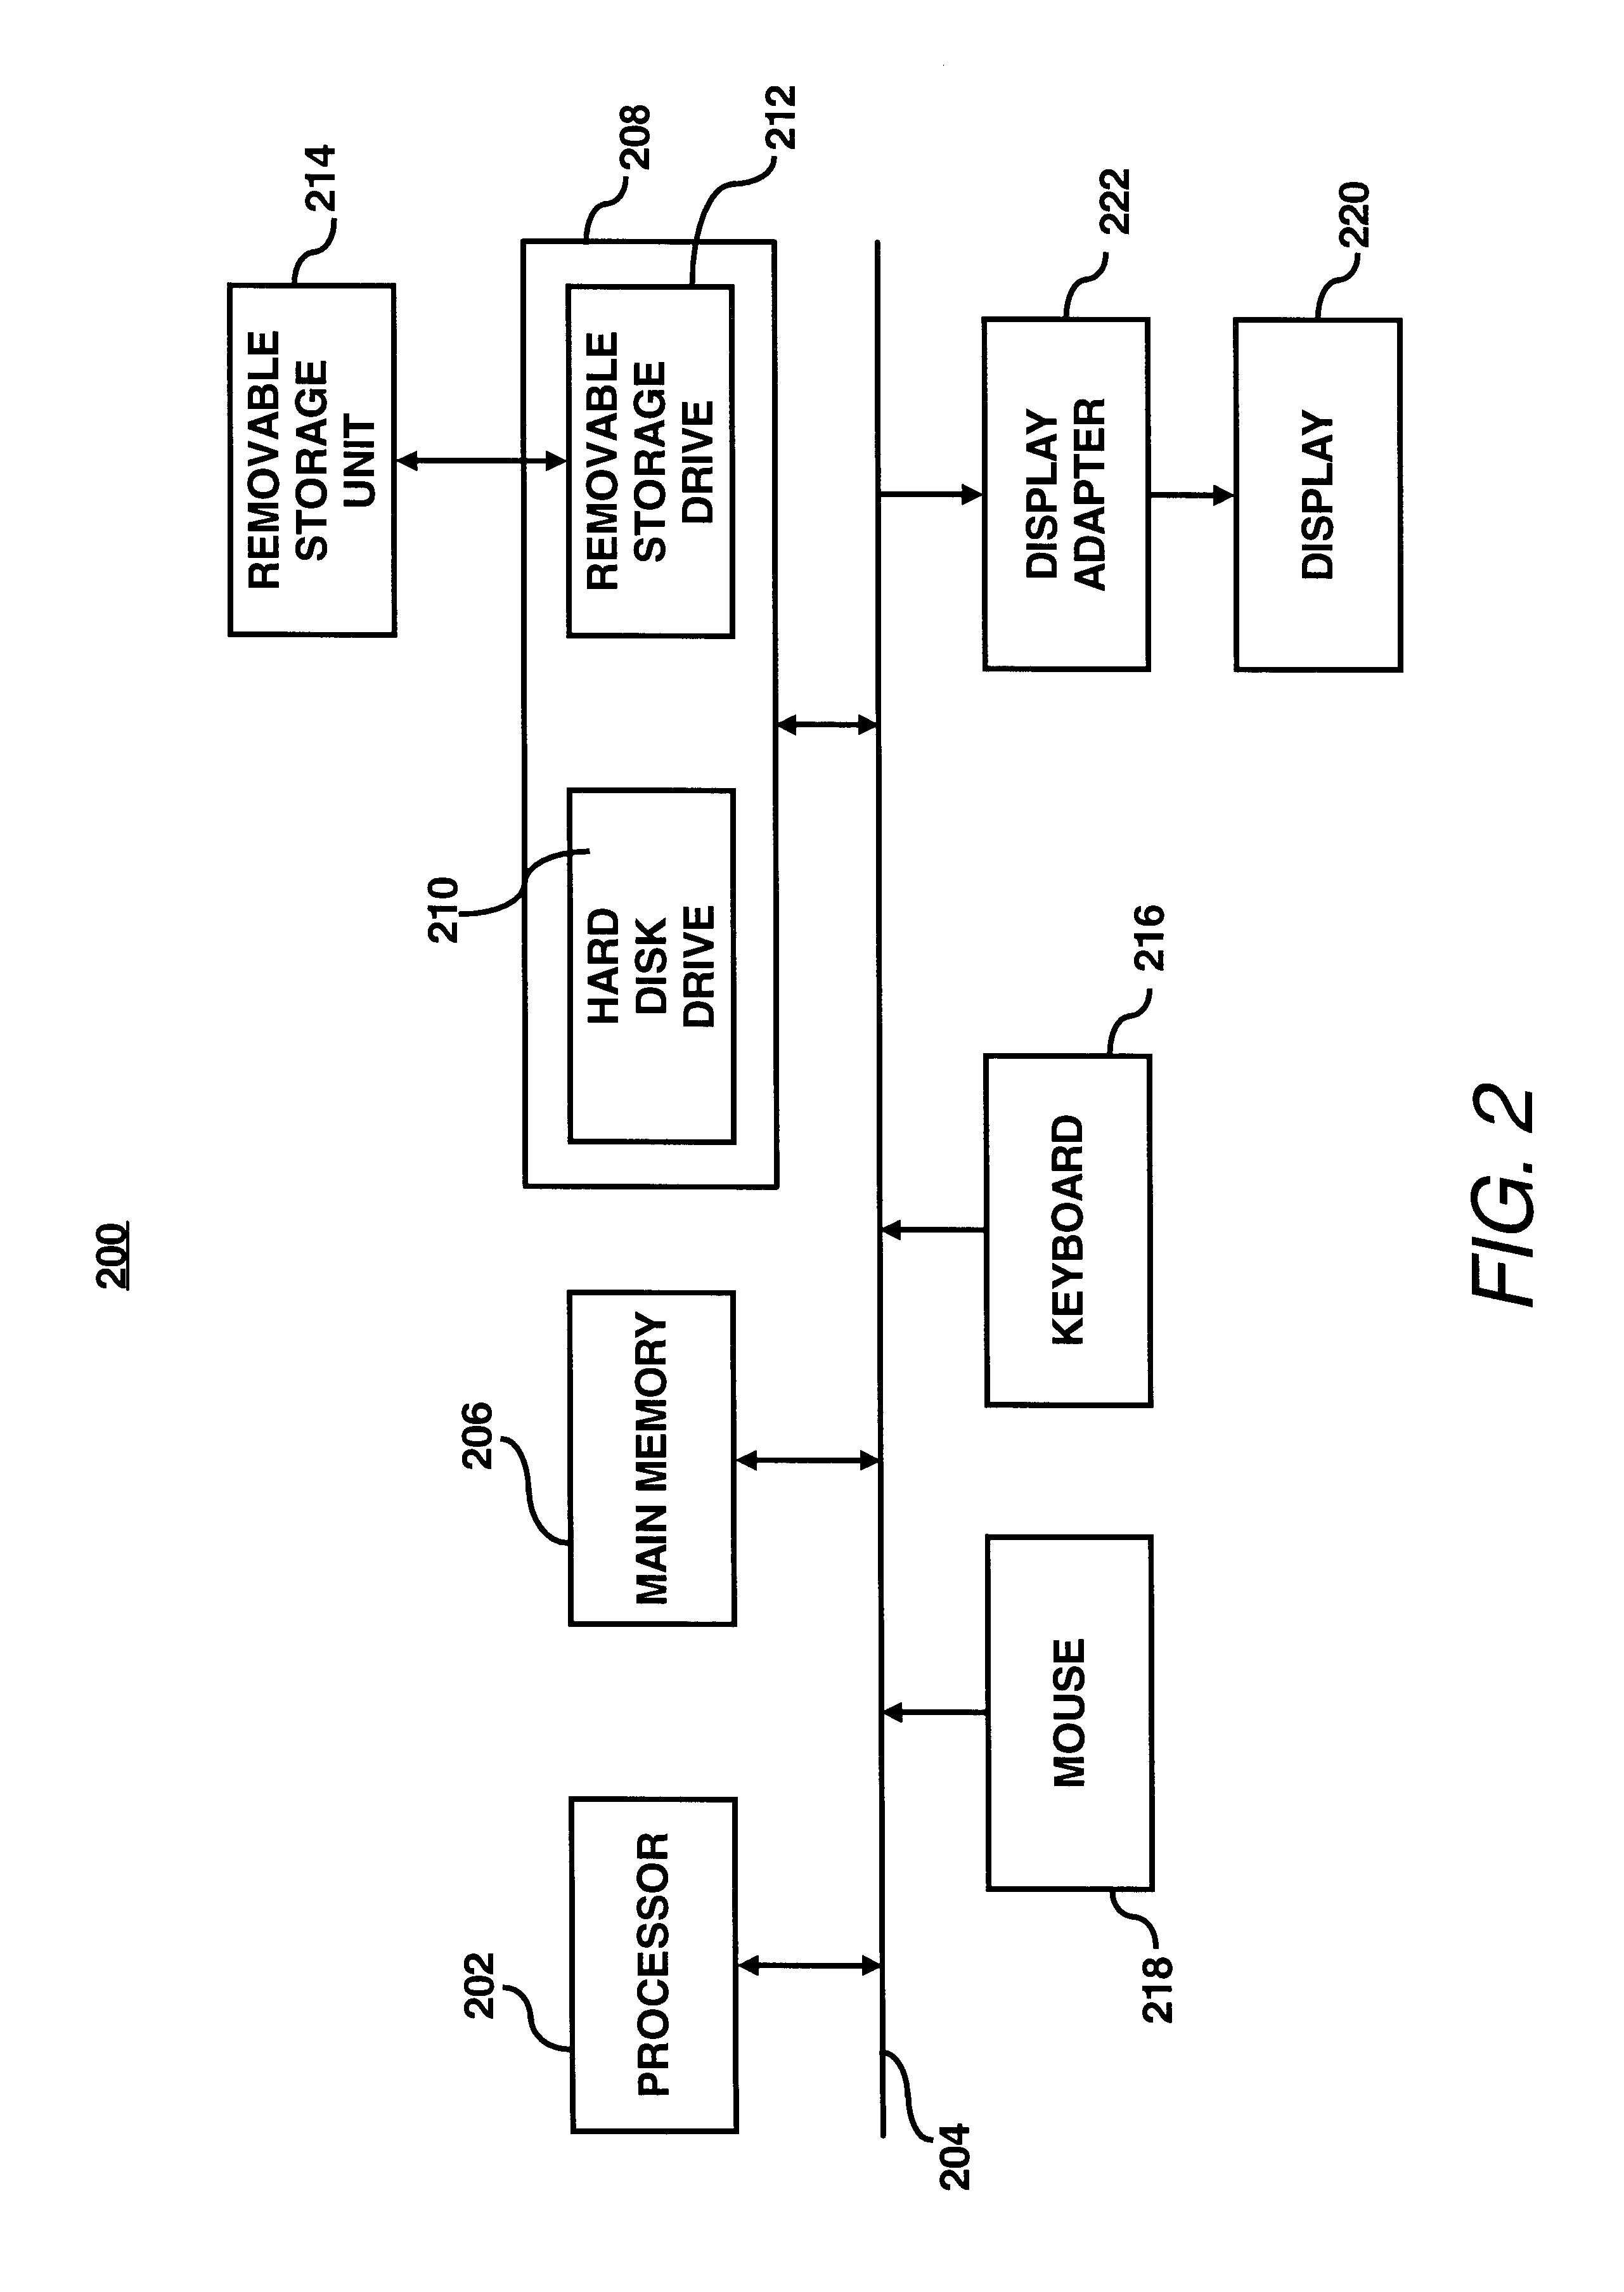 System for improving circuit simulations by utilizing a simplified circuit model based on effective capacitance and inductance values